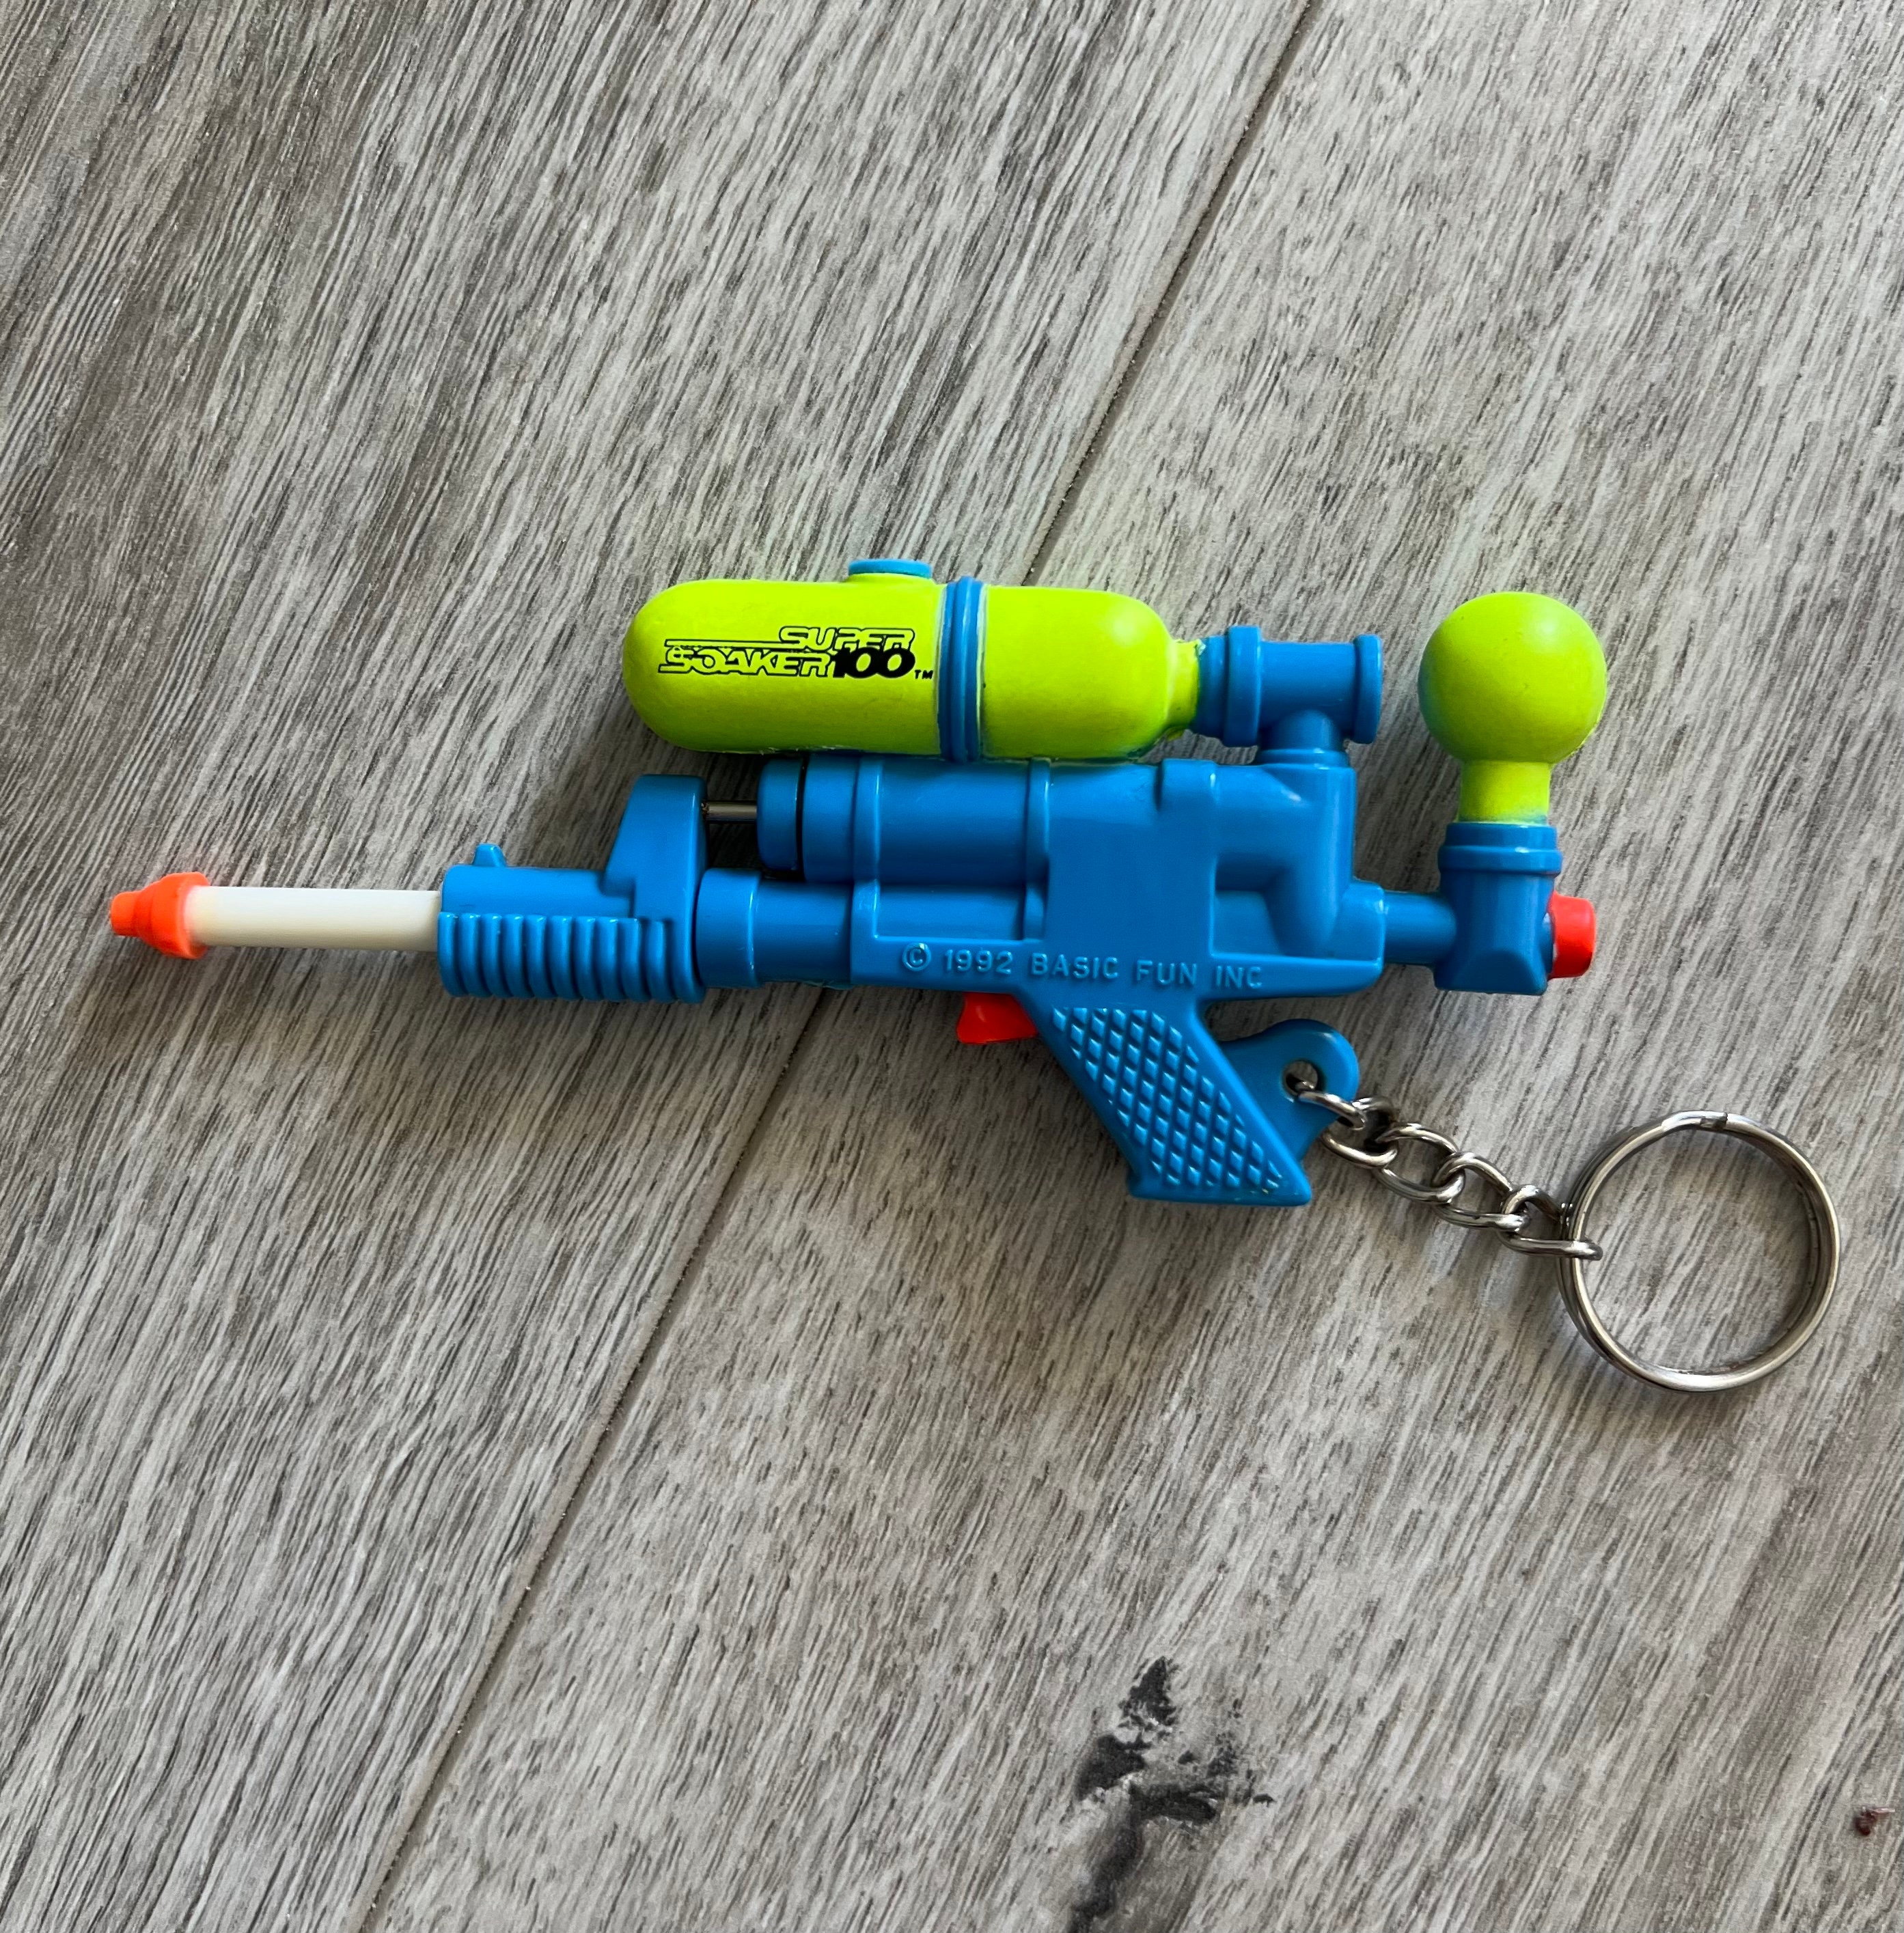 Supersoaker 100 Keychain - Etsy